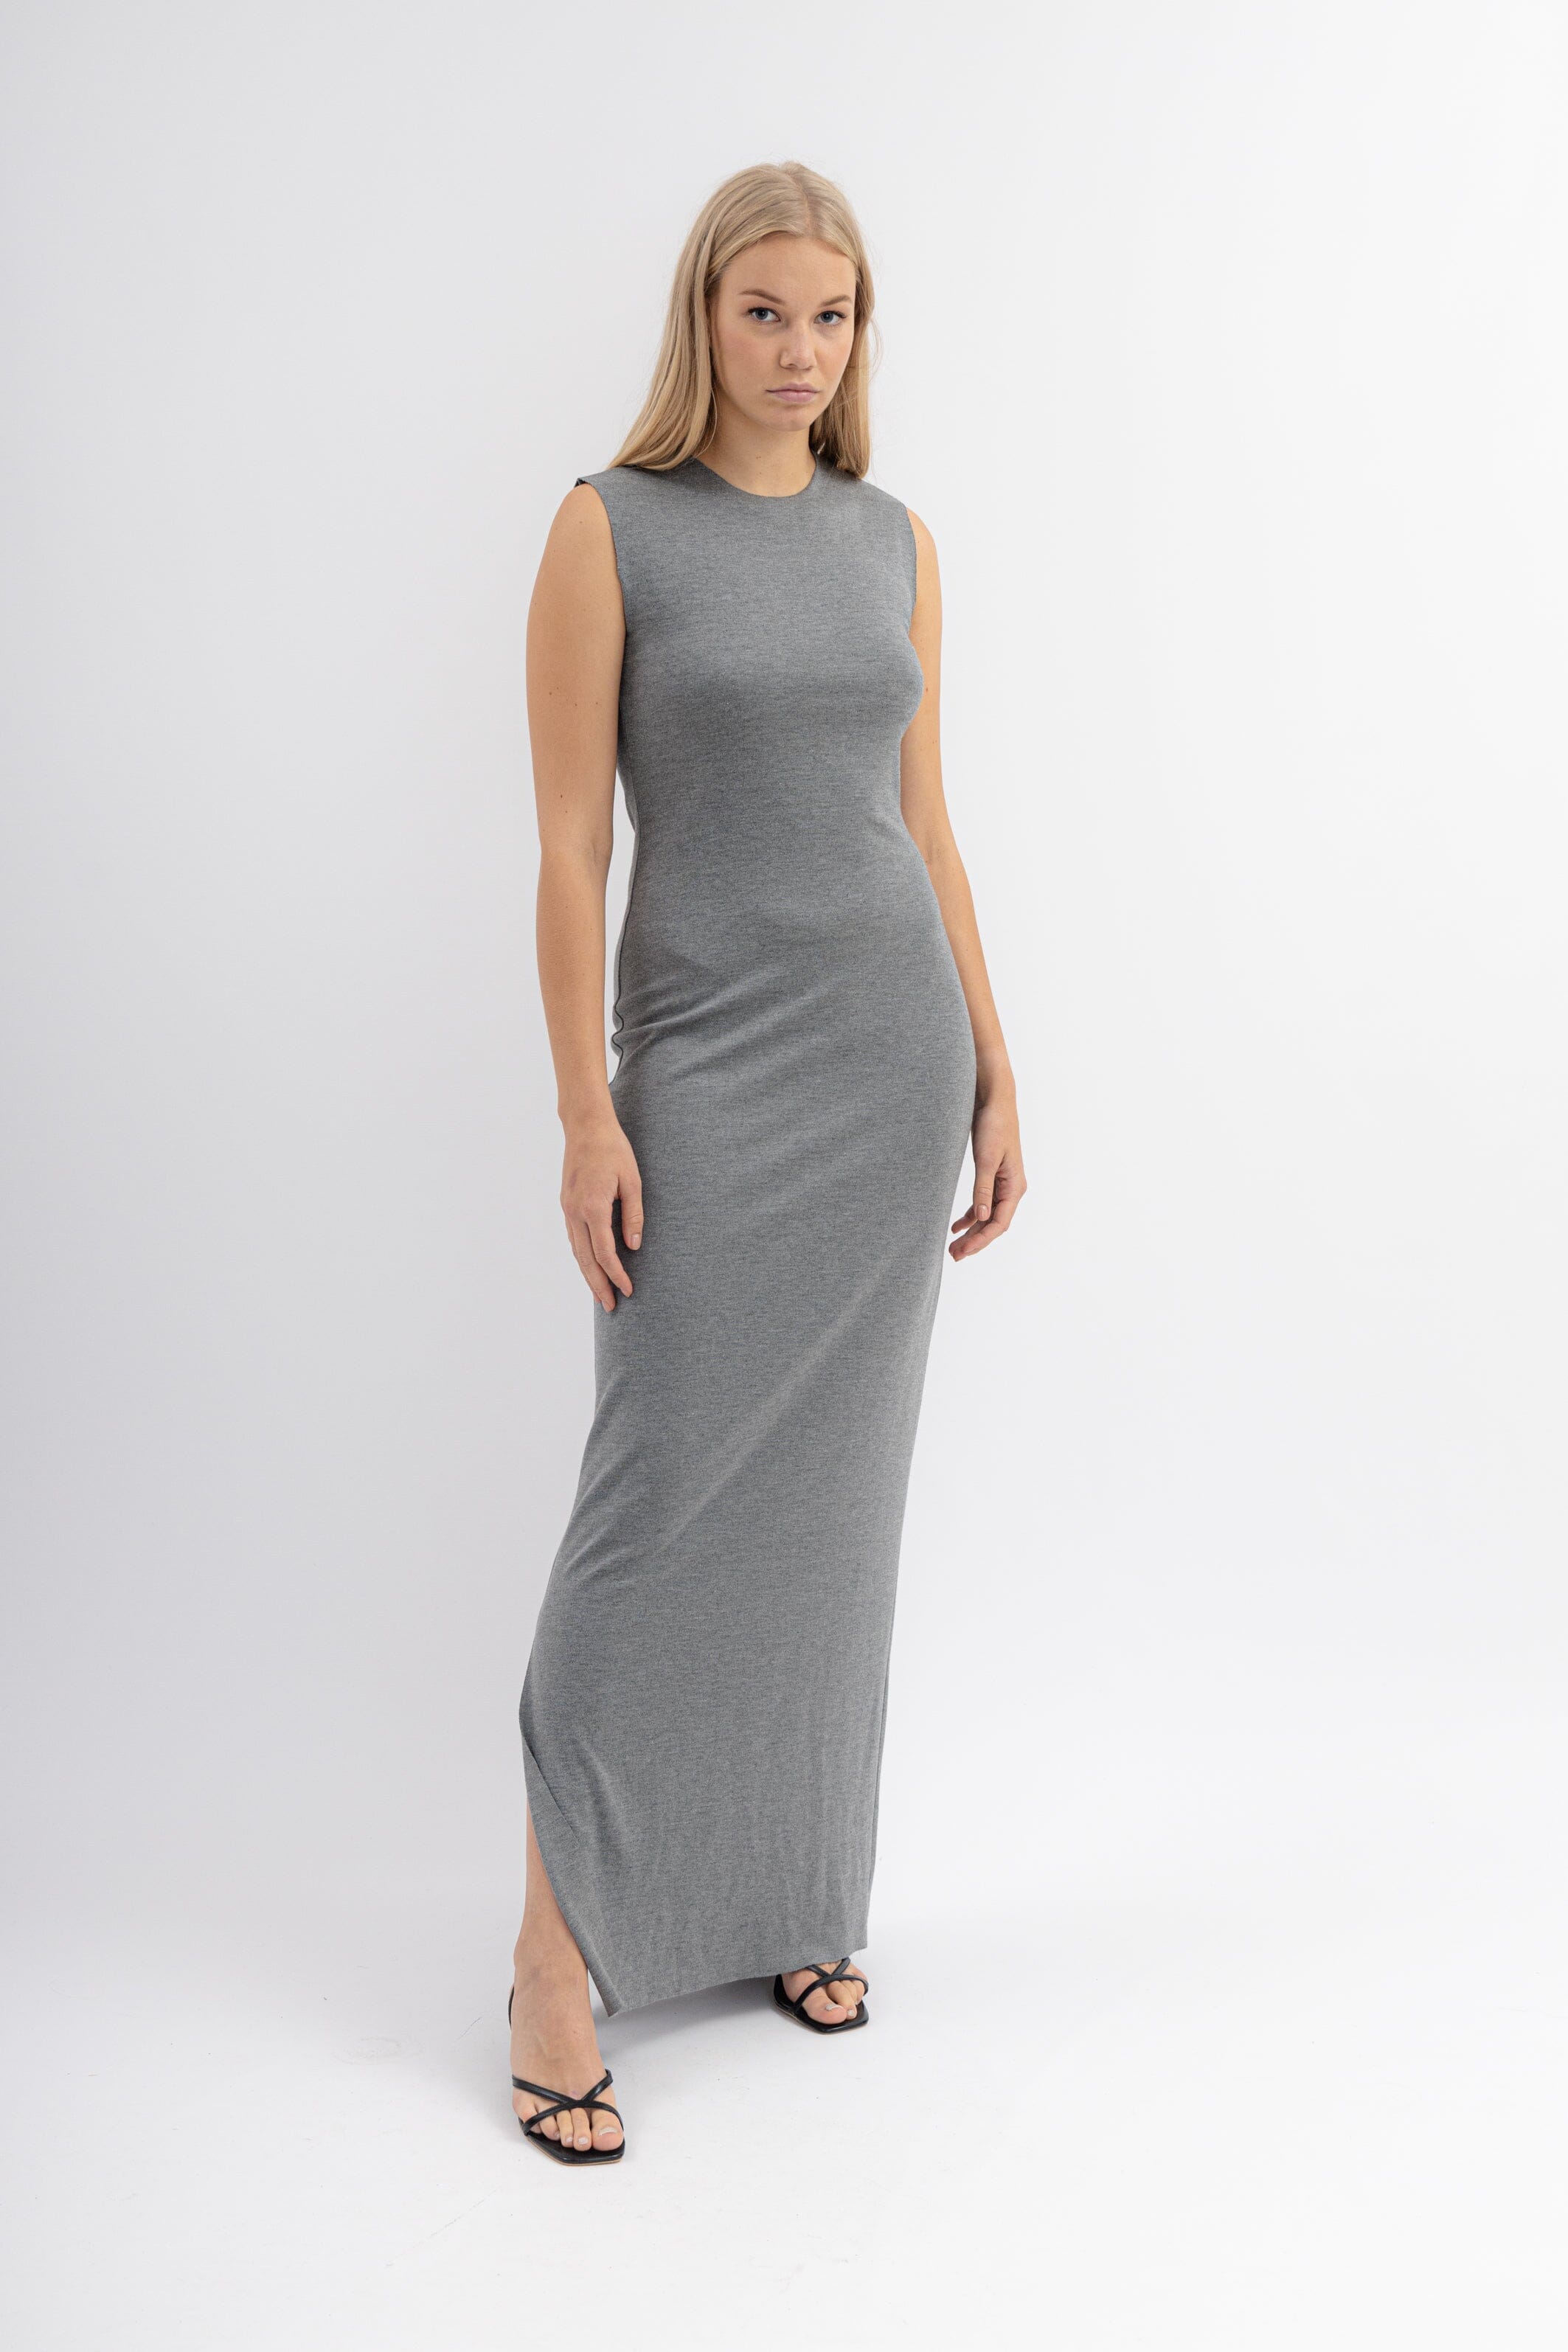  Blended Cashmere Dress Grey Product Amoralle